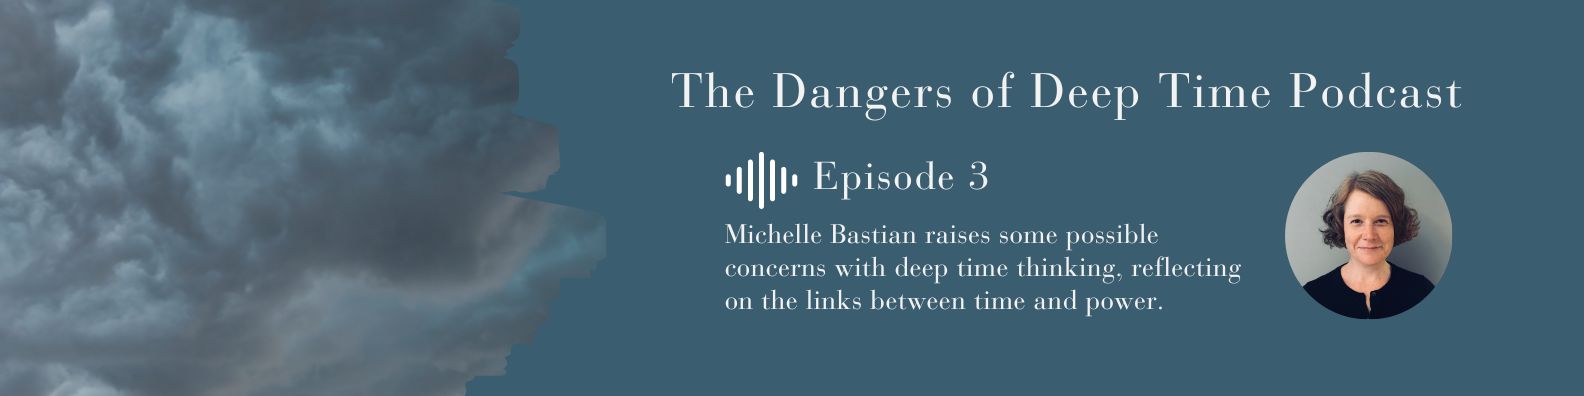 Dangers of Deep Time Podcast Episode 3 Bastian